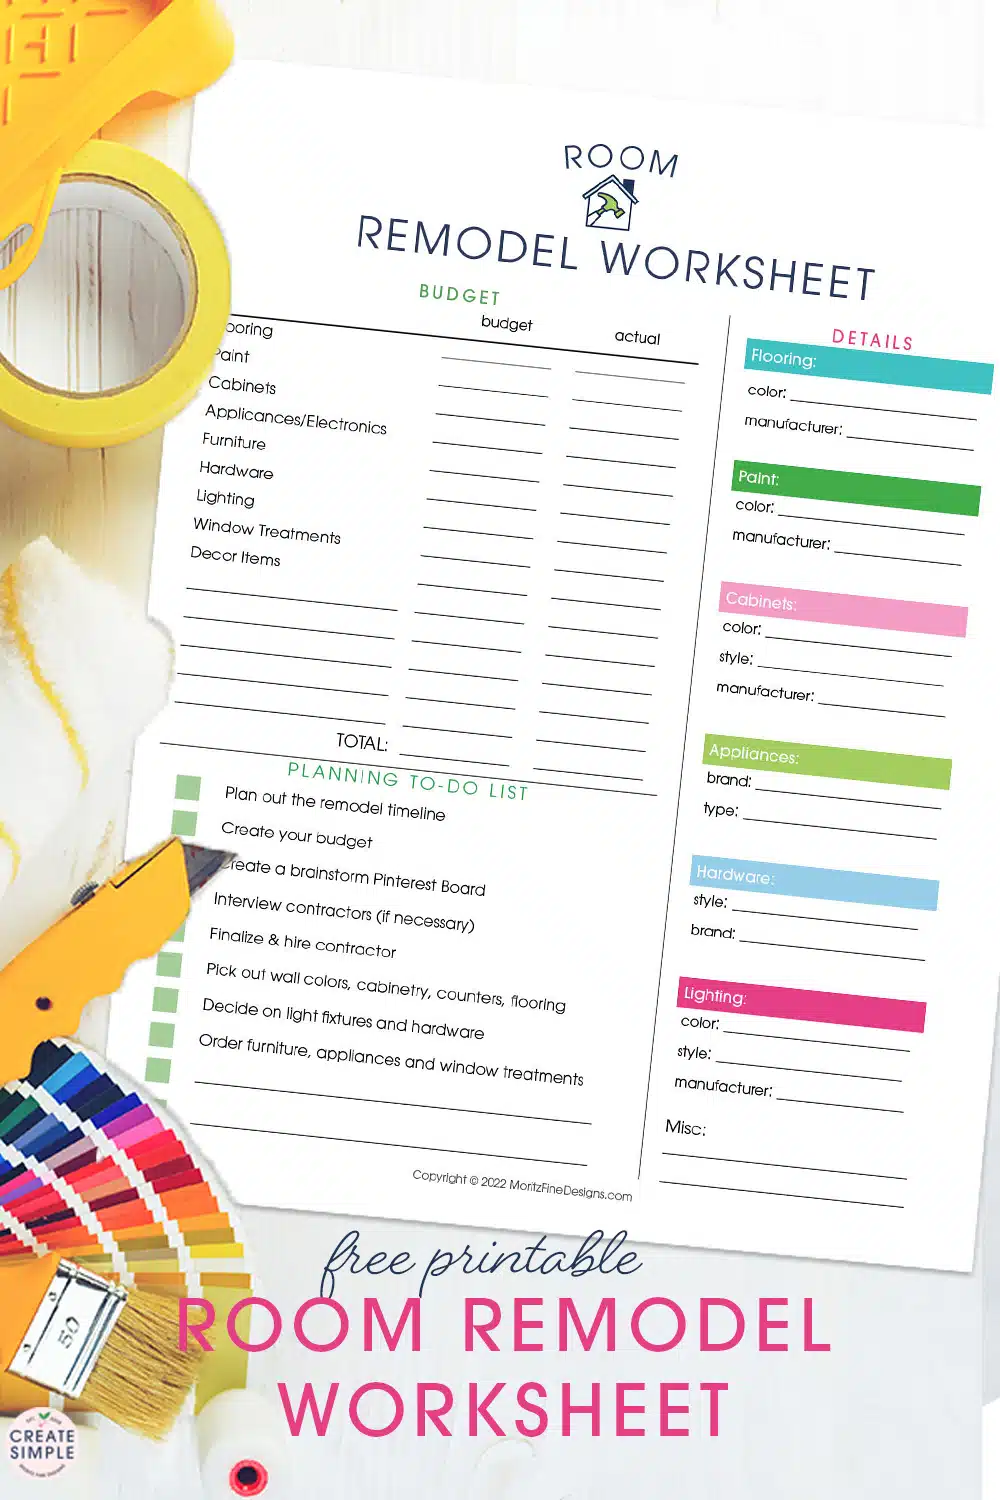 Use the free printable Room Remodel Worksheet to create a master plan for upgrading or remodeling any room in your home.